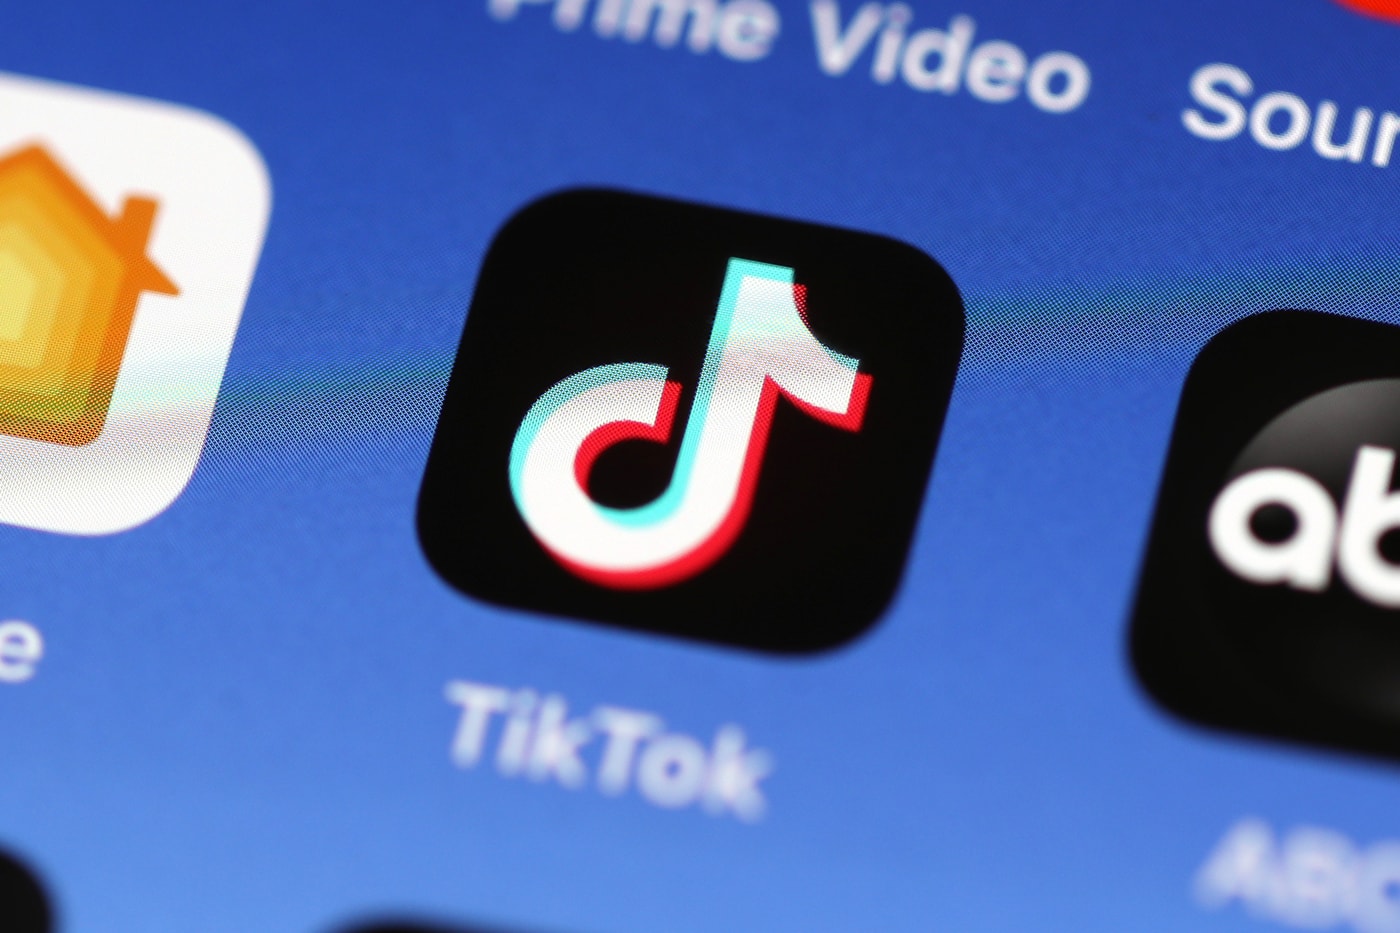 TikTok Parent Company ByteDance Sued Child Privacy Laws Violation Children’s Online Privacy Protection Act